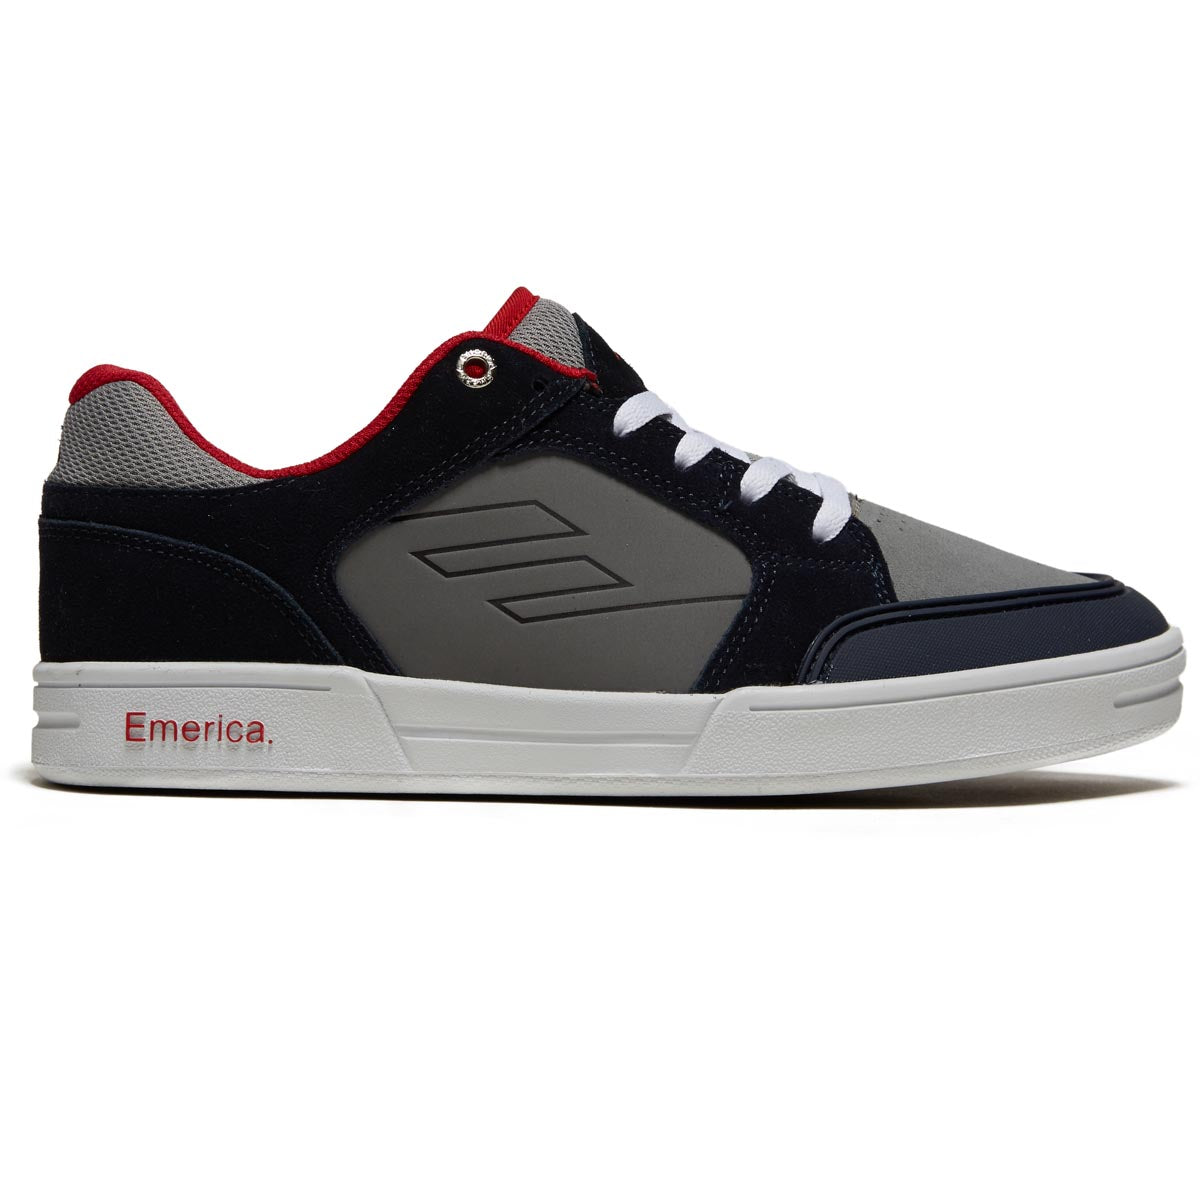 Emerica Heritic Shoes - Navy/Grey/Red image 1